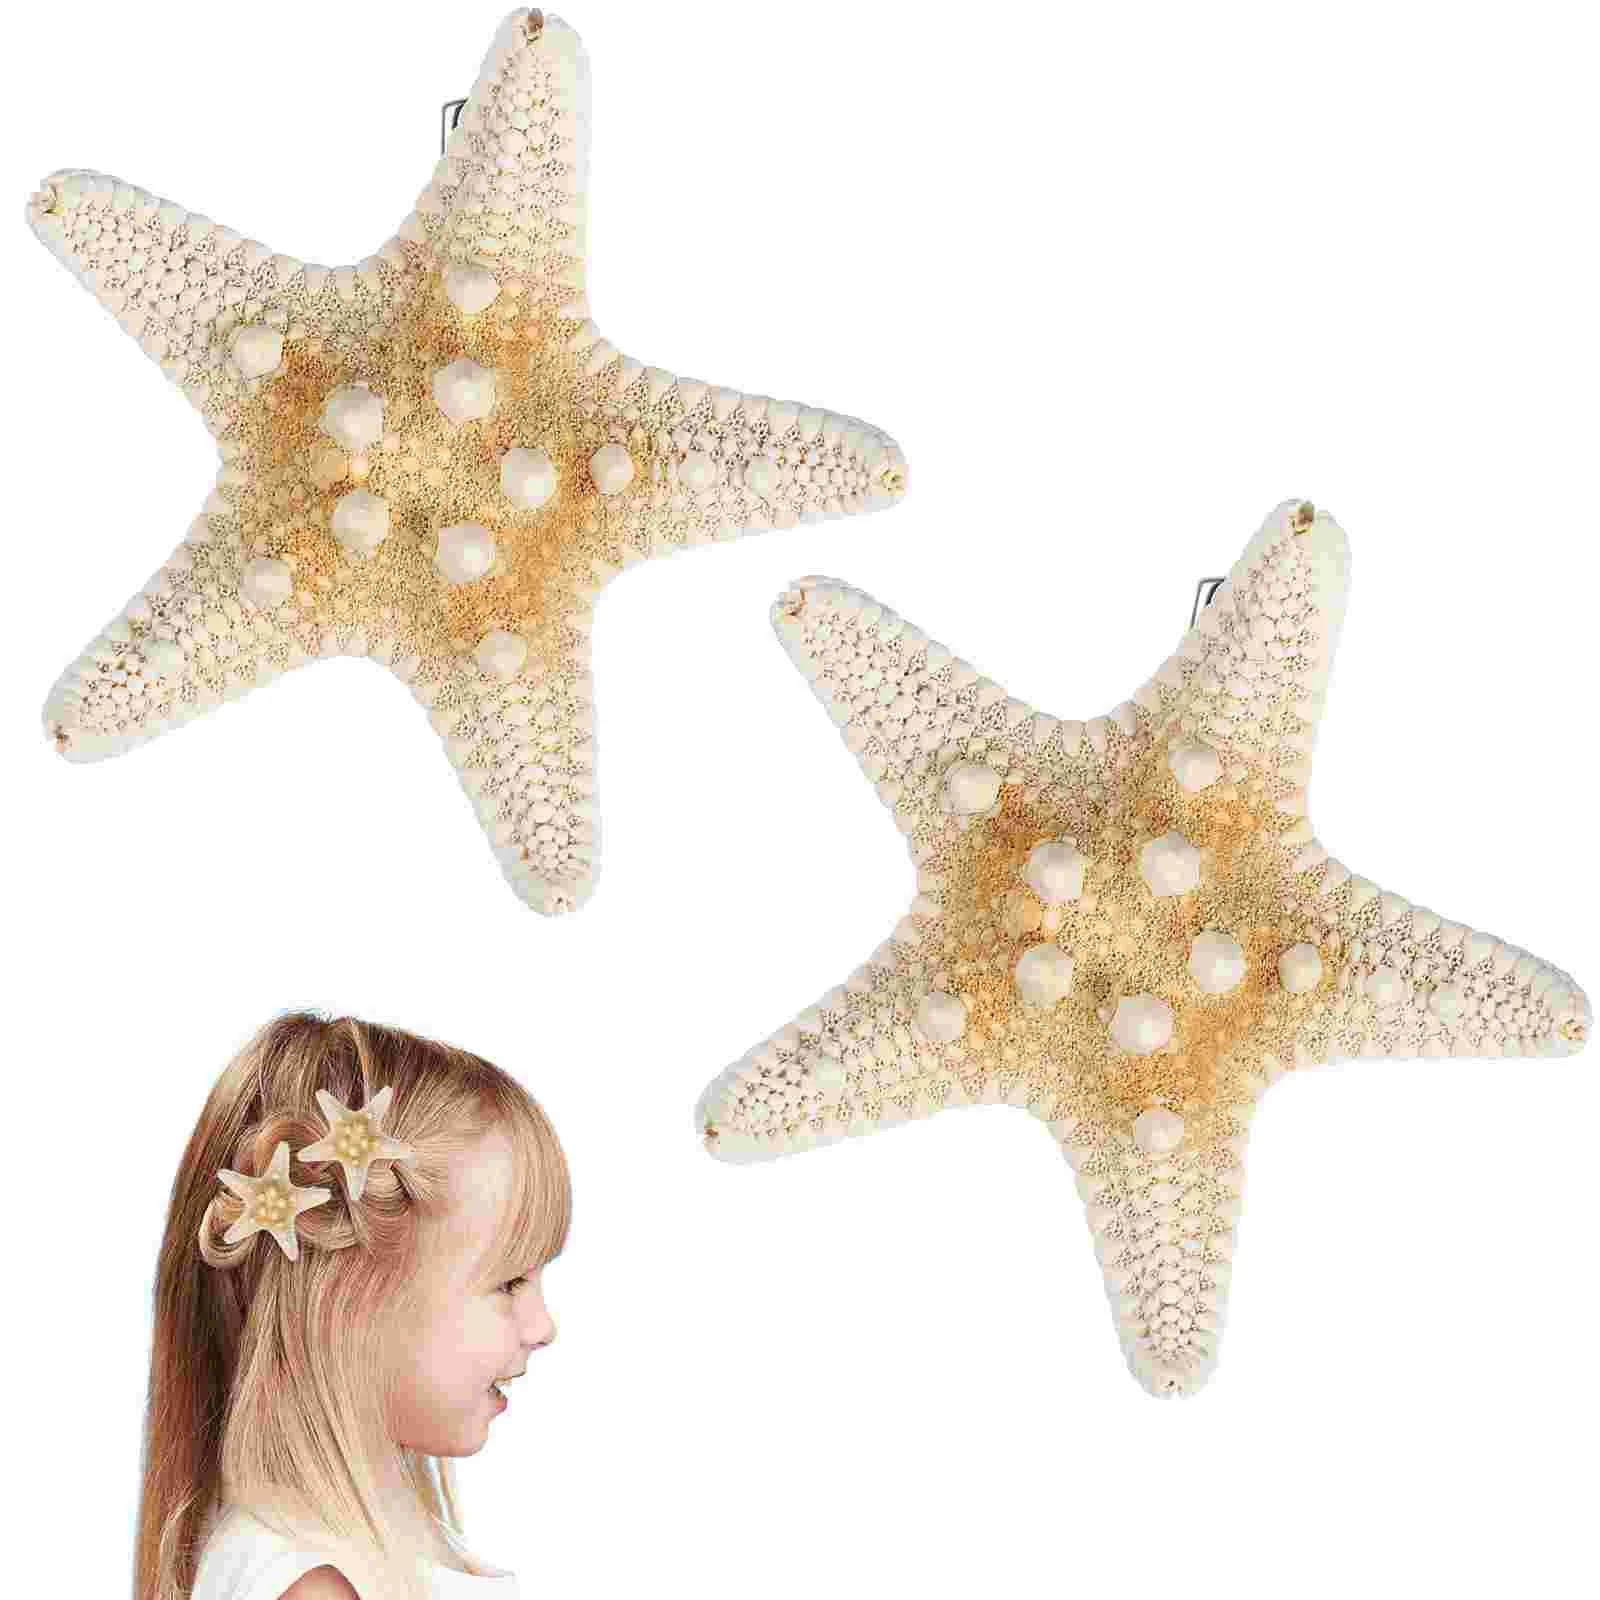 

2 Pcs Frcolor Handmade Natural Starfish Hair Clips 2pcs/pack Small Clamps Modeling Accessories Bangs for Styling Girls Miss